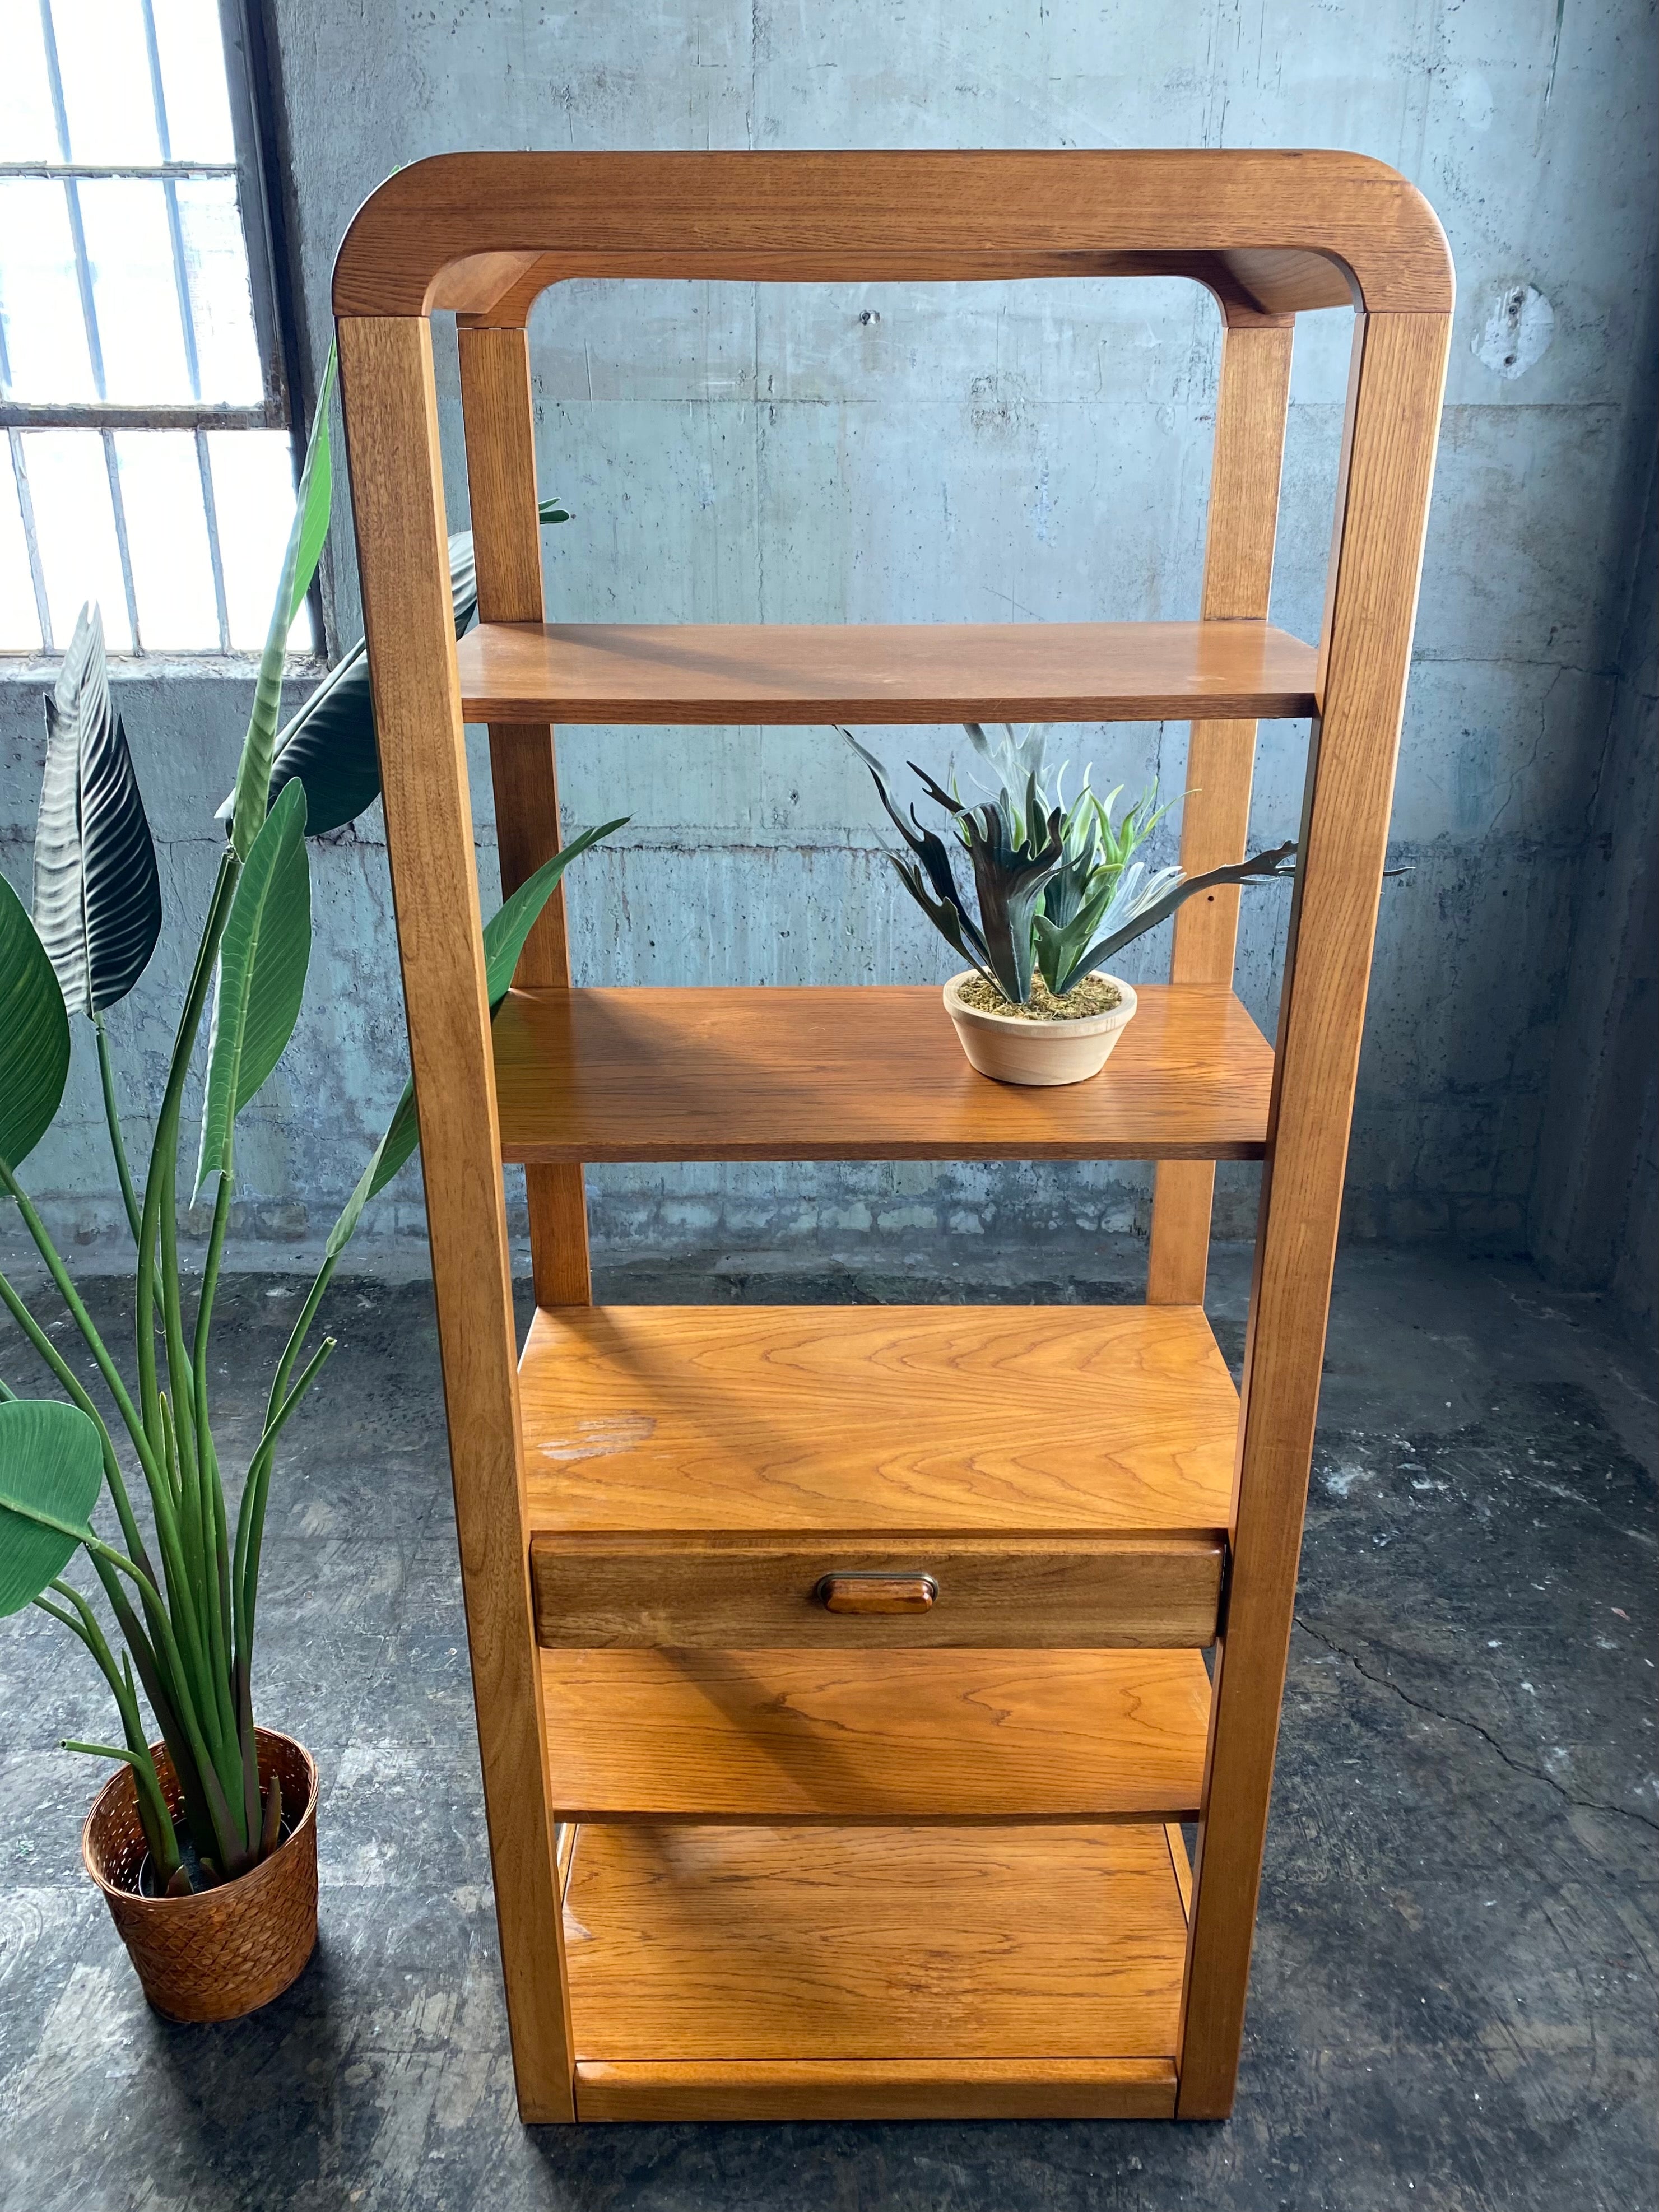 Vintage Etagere Shelving Unit with Drawer